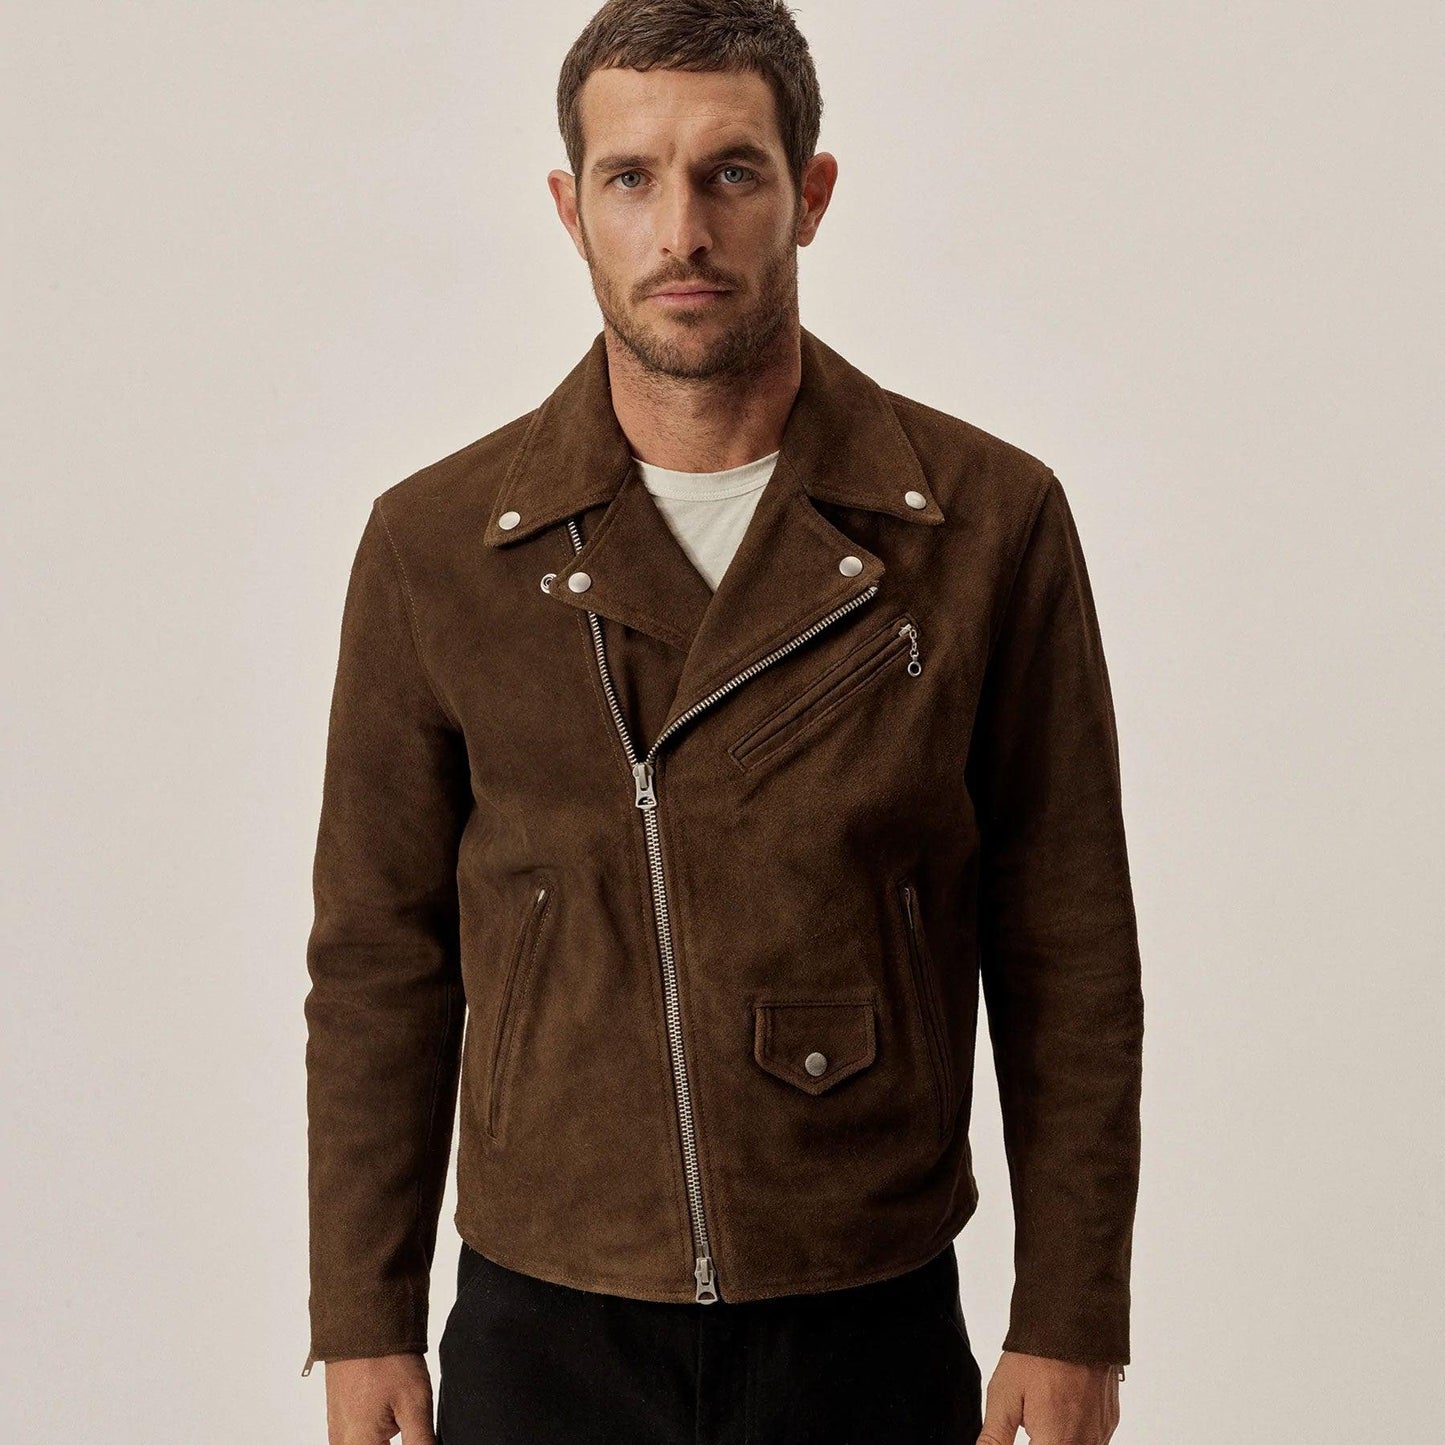 Men's Brown Leather Suede Bomber Jeans Style Jacket